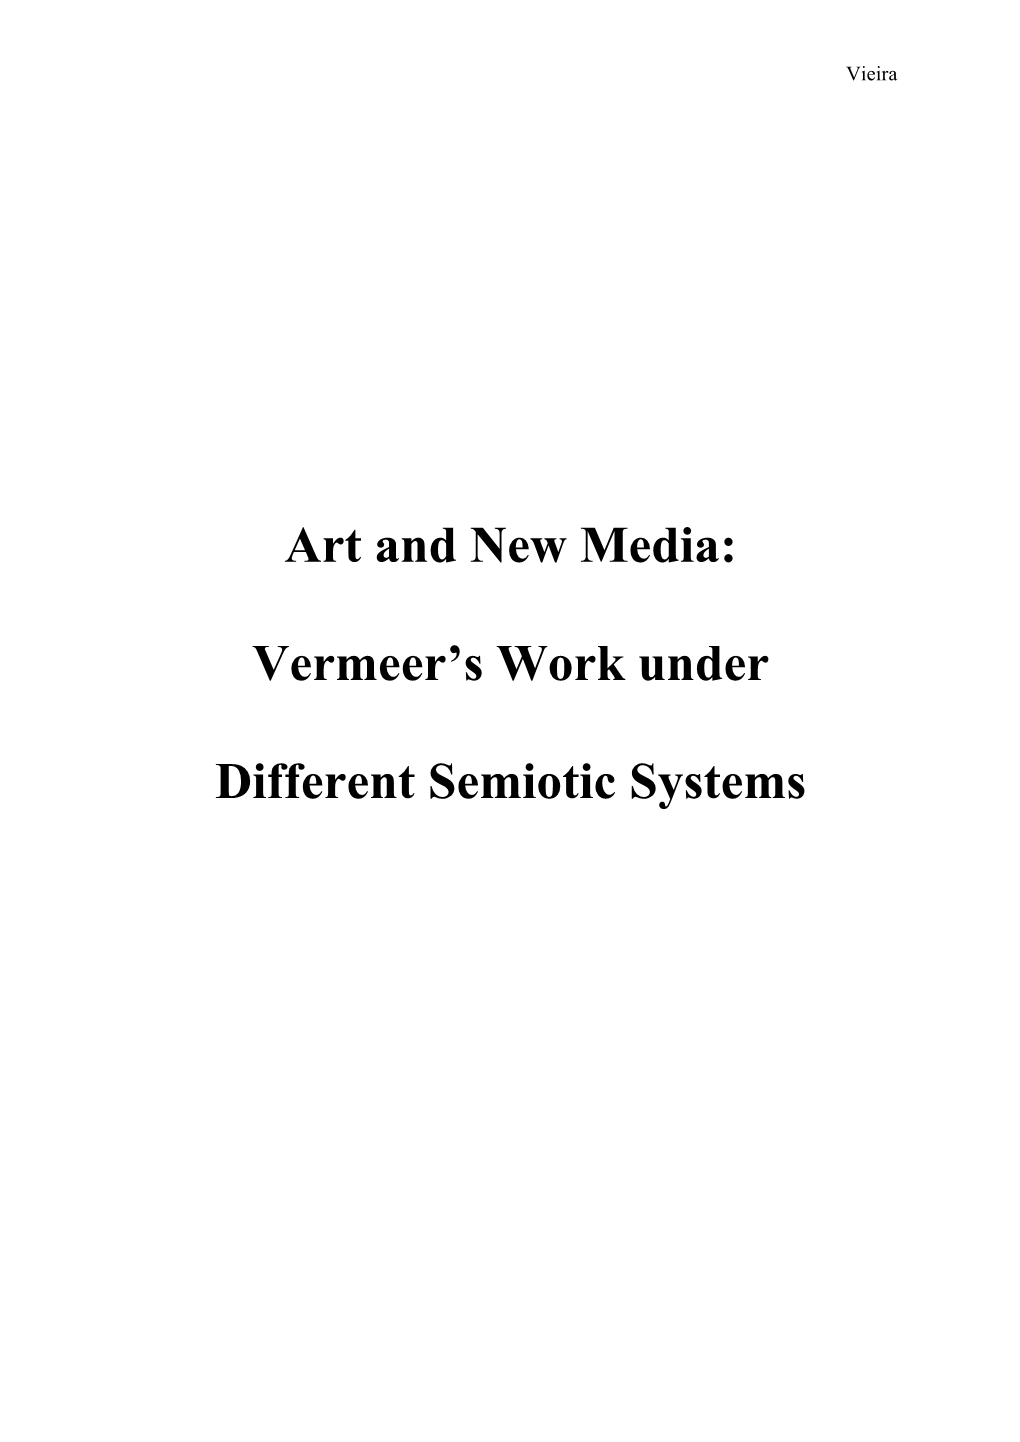 Art and New Media: Vermeer's Work Under Different Semiotic Systems